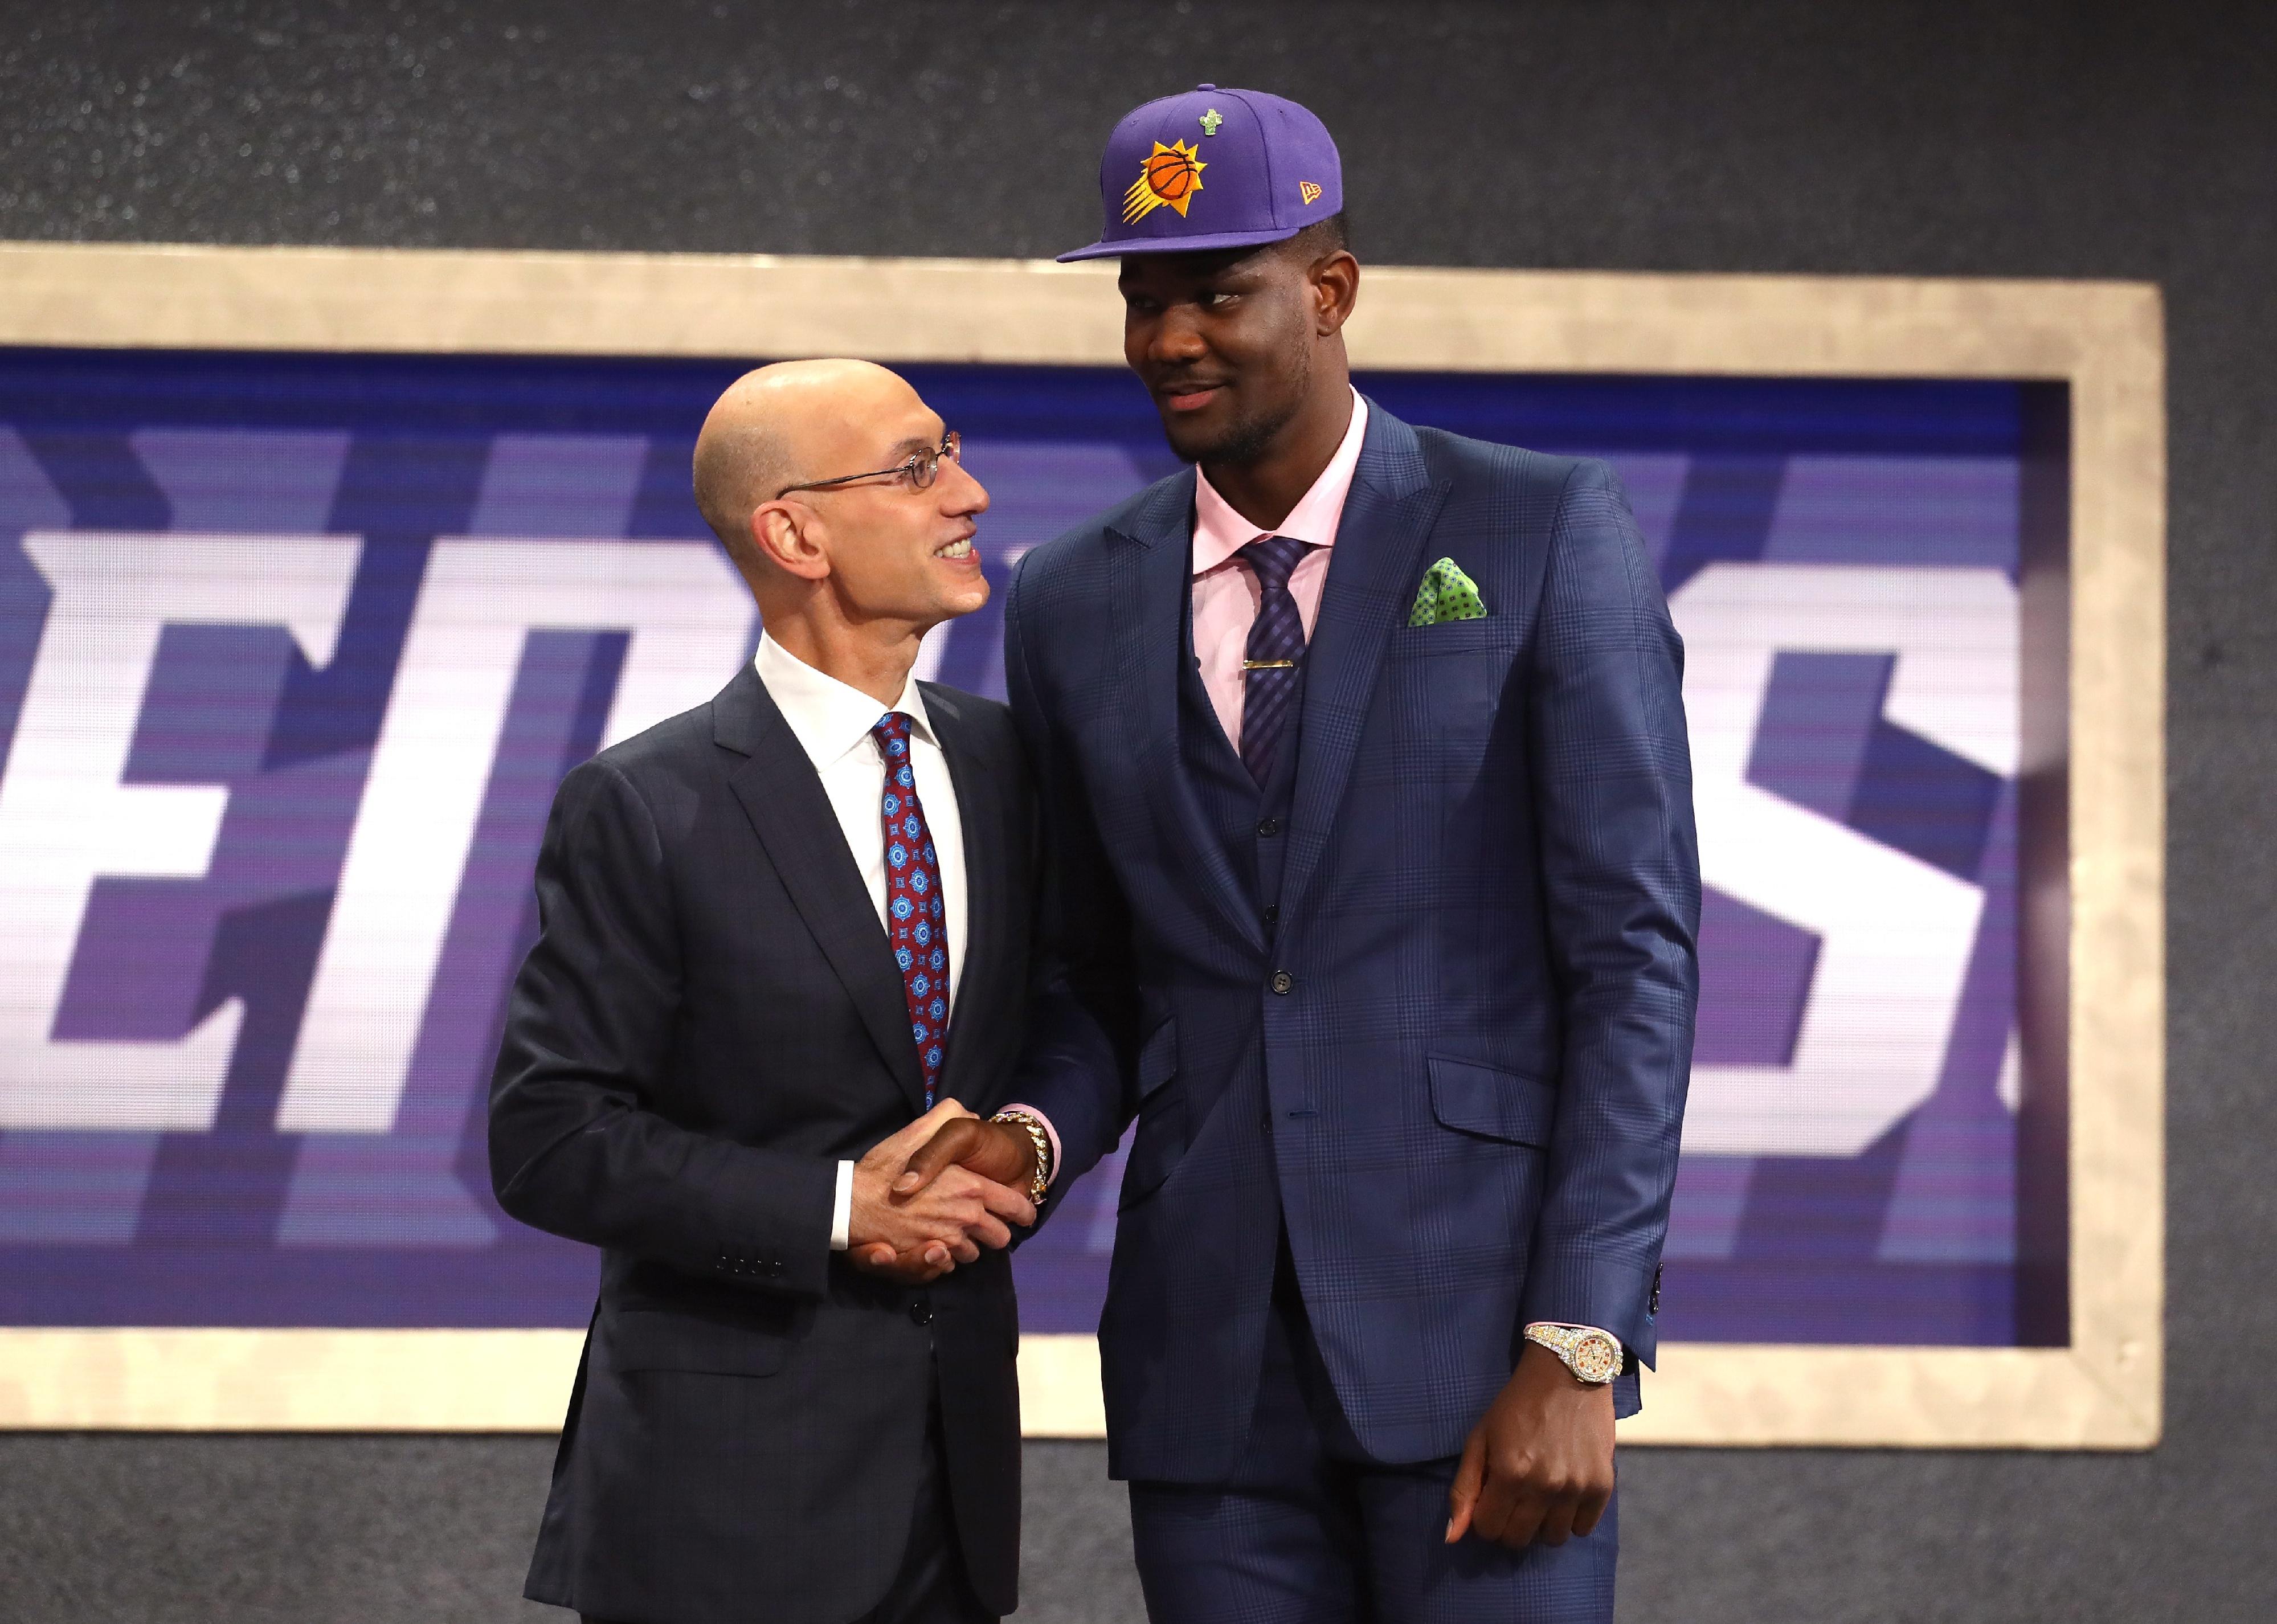 Deandre Ayton with NBA Commissioner Adam Silver after being drafted.